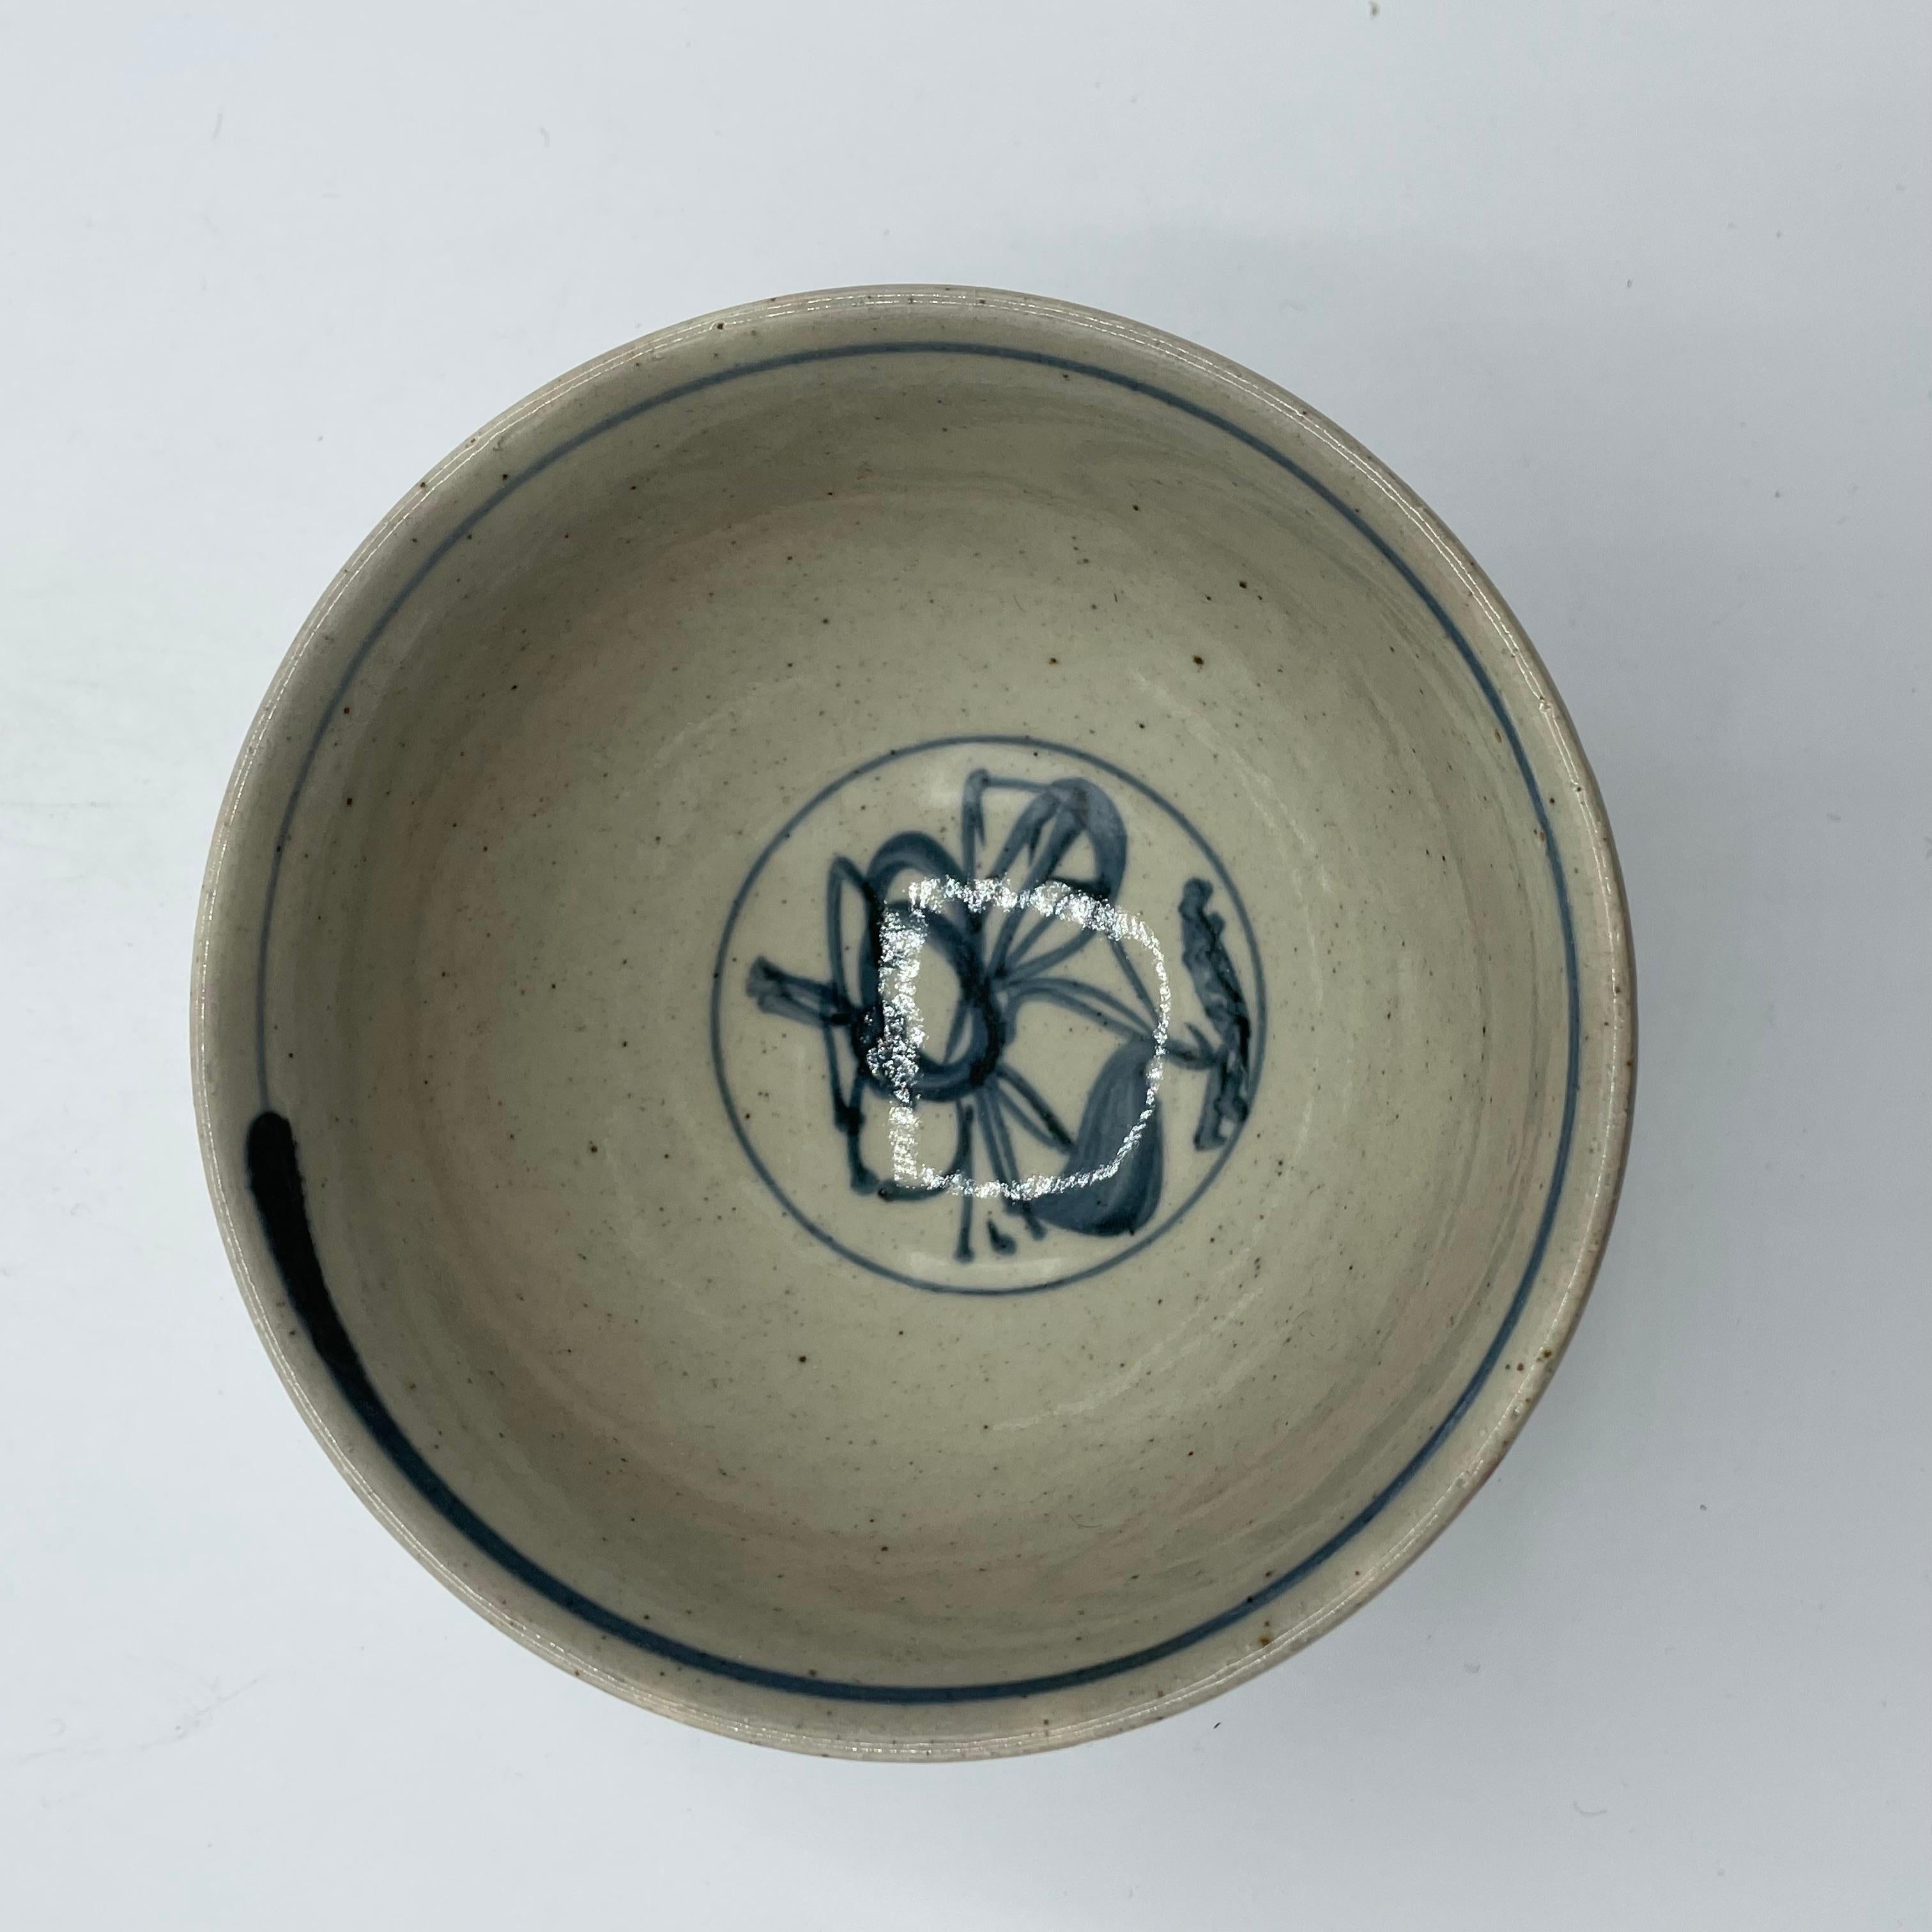 This is a matcha bowl which we use during a tea ceremony in Japan.
There are a signature written on the bottom of this bowl 'Mizuho'.
This matcha bowl was made in Japan around 1990s in Heisei era.
It is made with Porcelain. And it is all hand